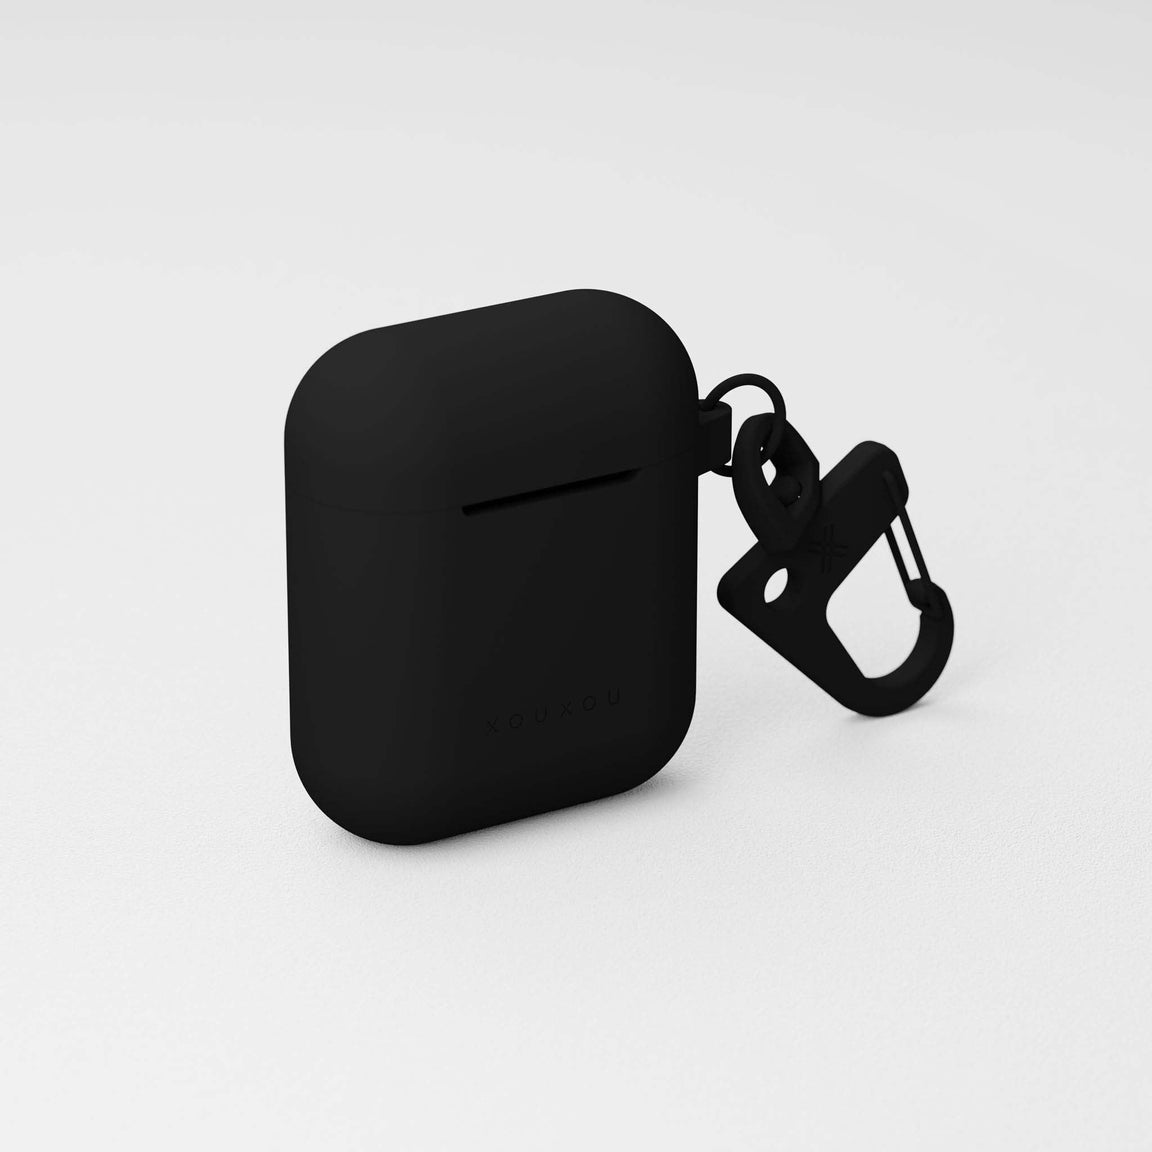 Black Apple AirPods Case 1st and 2nd generation with black carabiner hook | XOUXOU